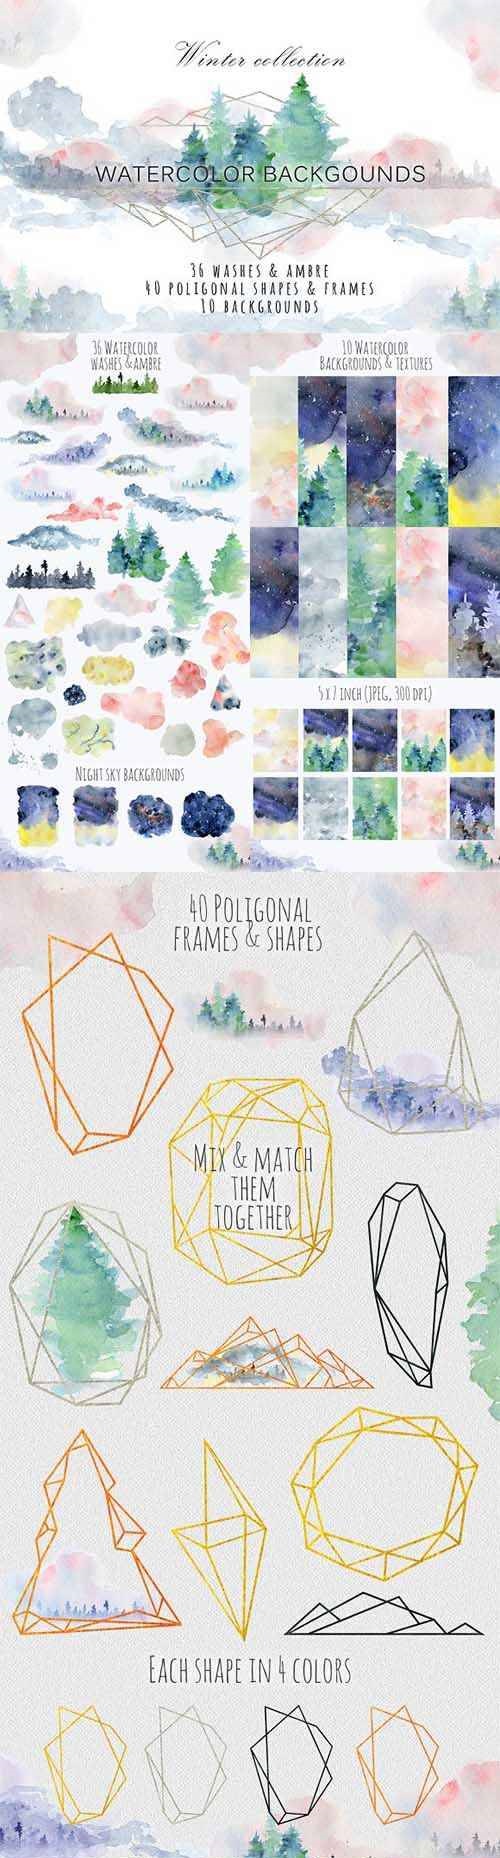 Winter watercolor backgrounds - 2088256